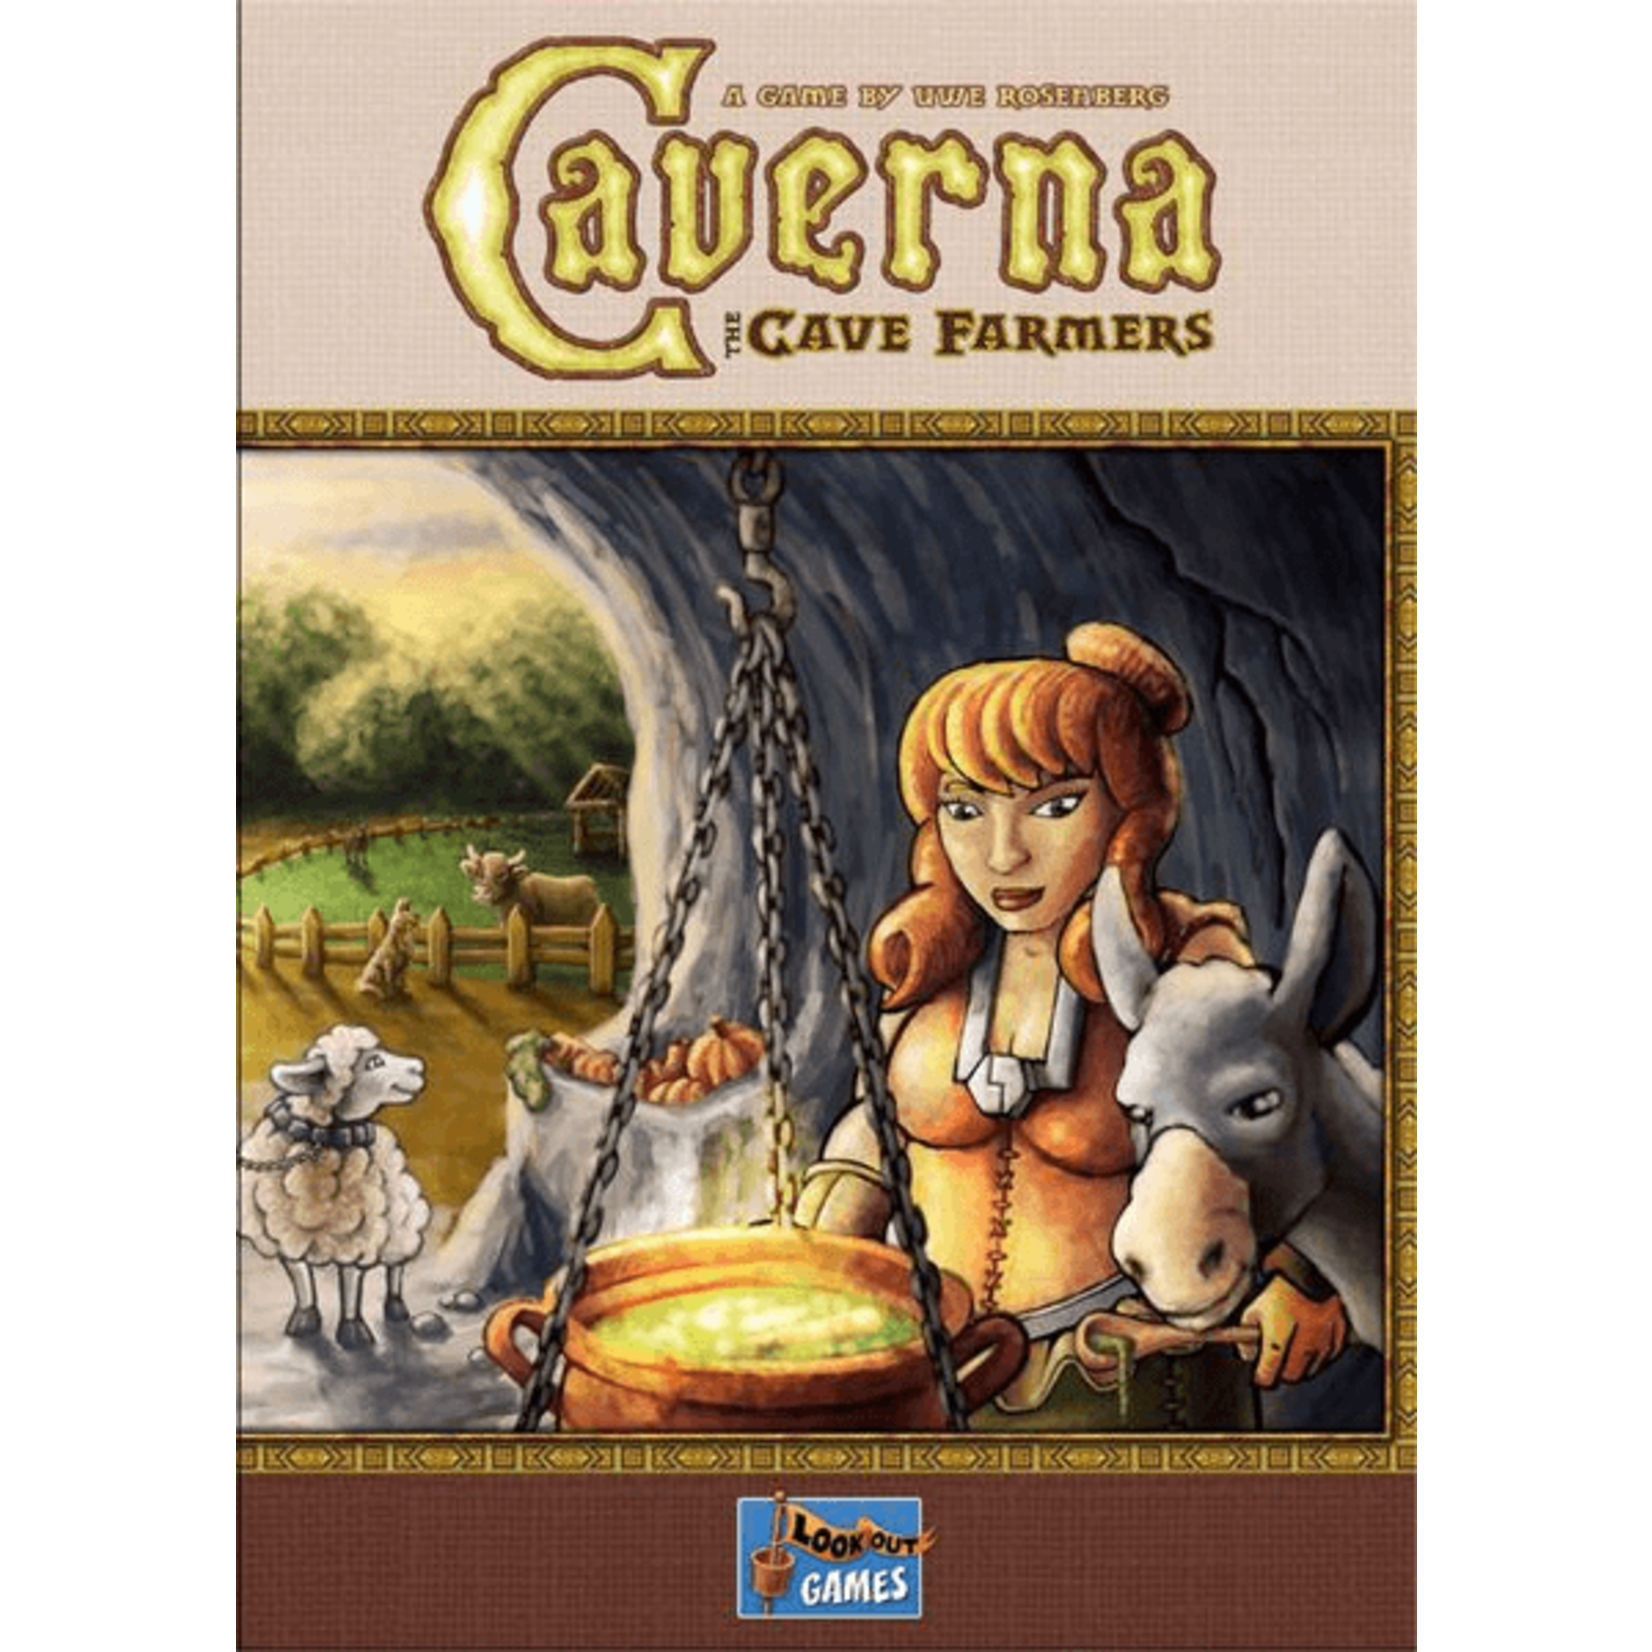 Lookout Games Caverna: The Cave Farmers